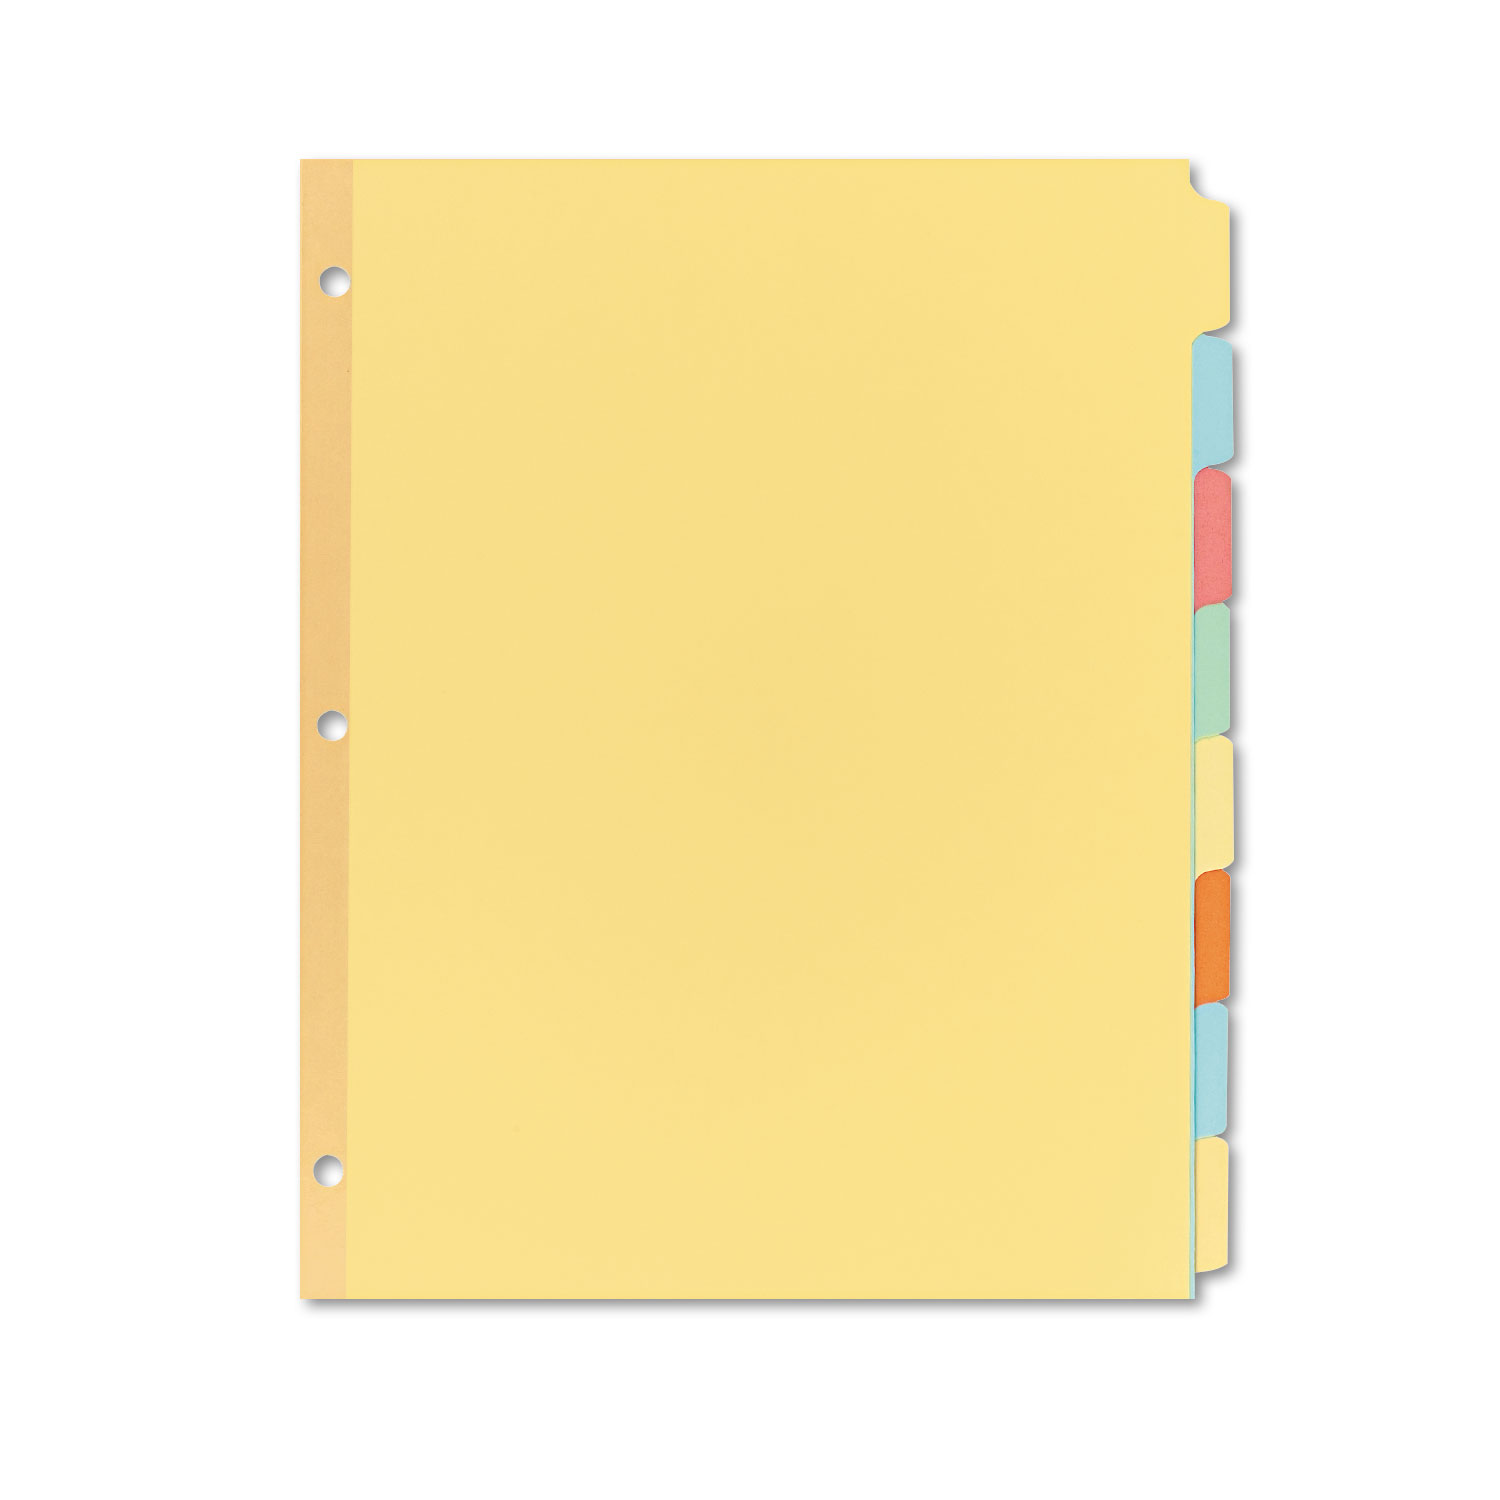  Avery 11509 Write & Erase Plain-Tab Paper Dividers, 8-Tab, Letter, Multicolor, 24 Sets (AVE11509) 